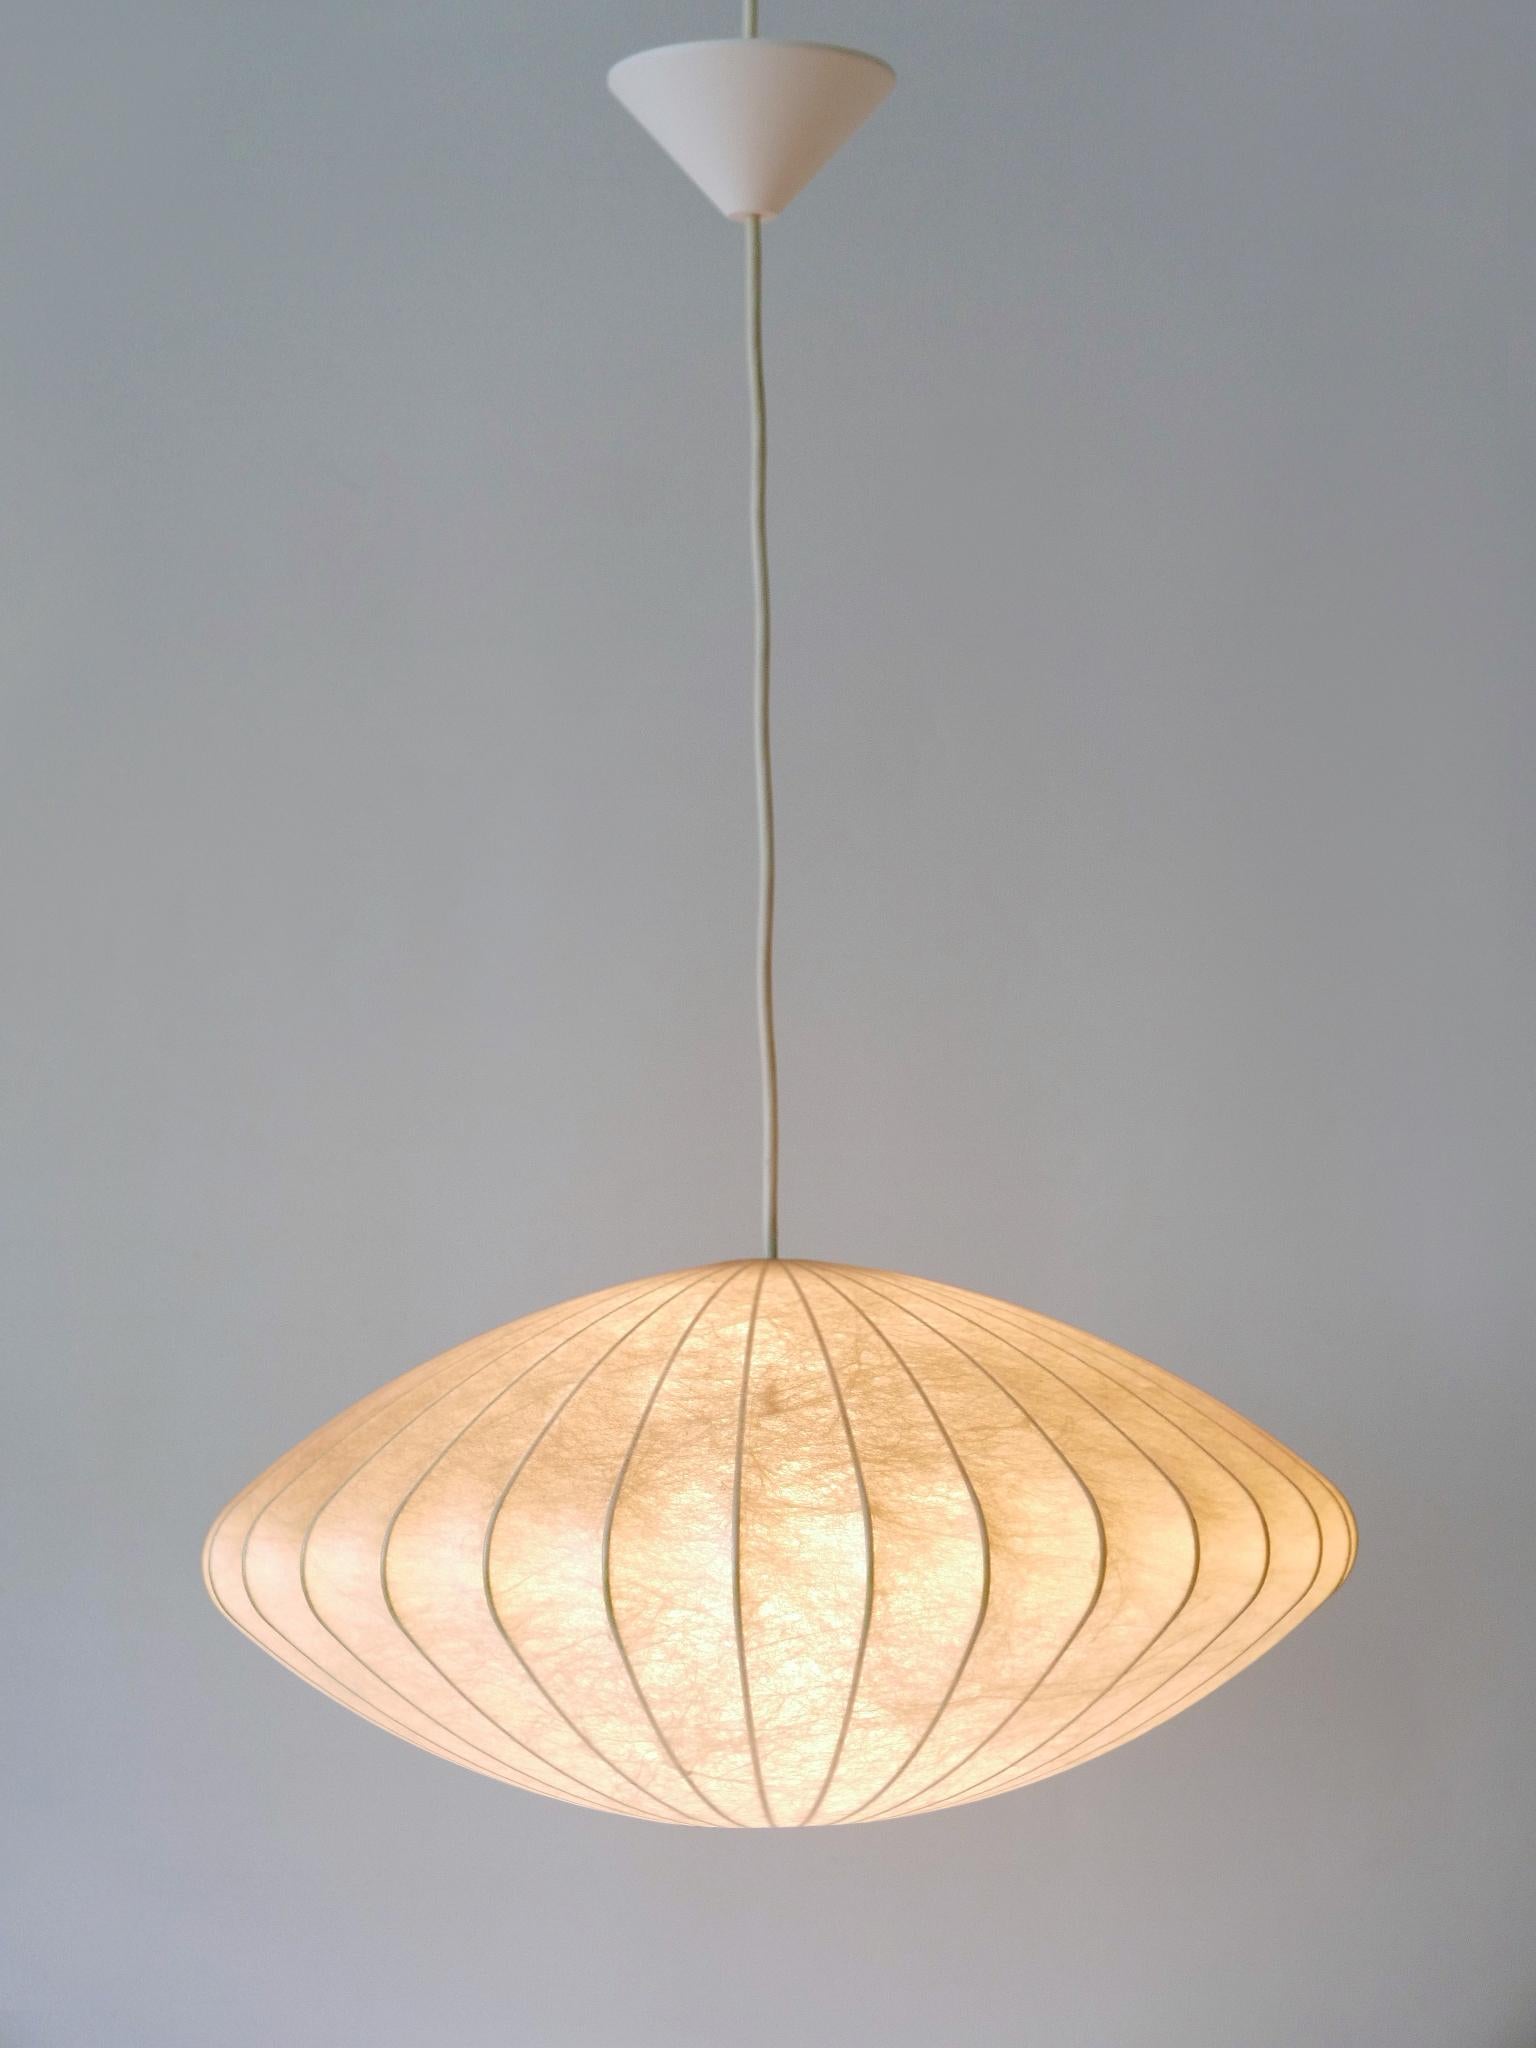 Metal Rare Mid-Century Modern Cocoon Pendant Lamp or Hanging Light by Goldkant 1960s For Sale